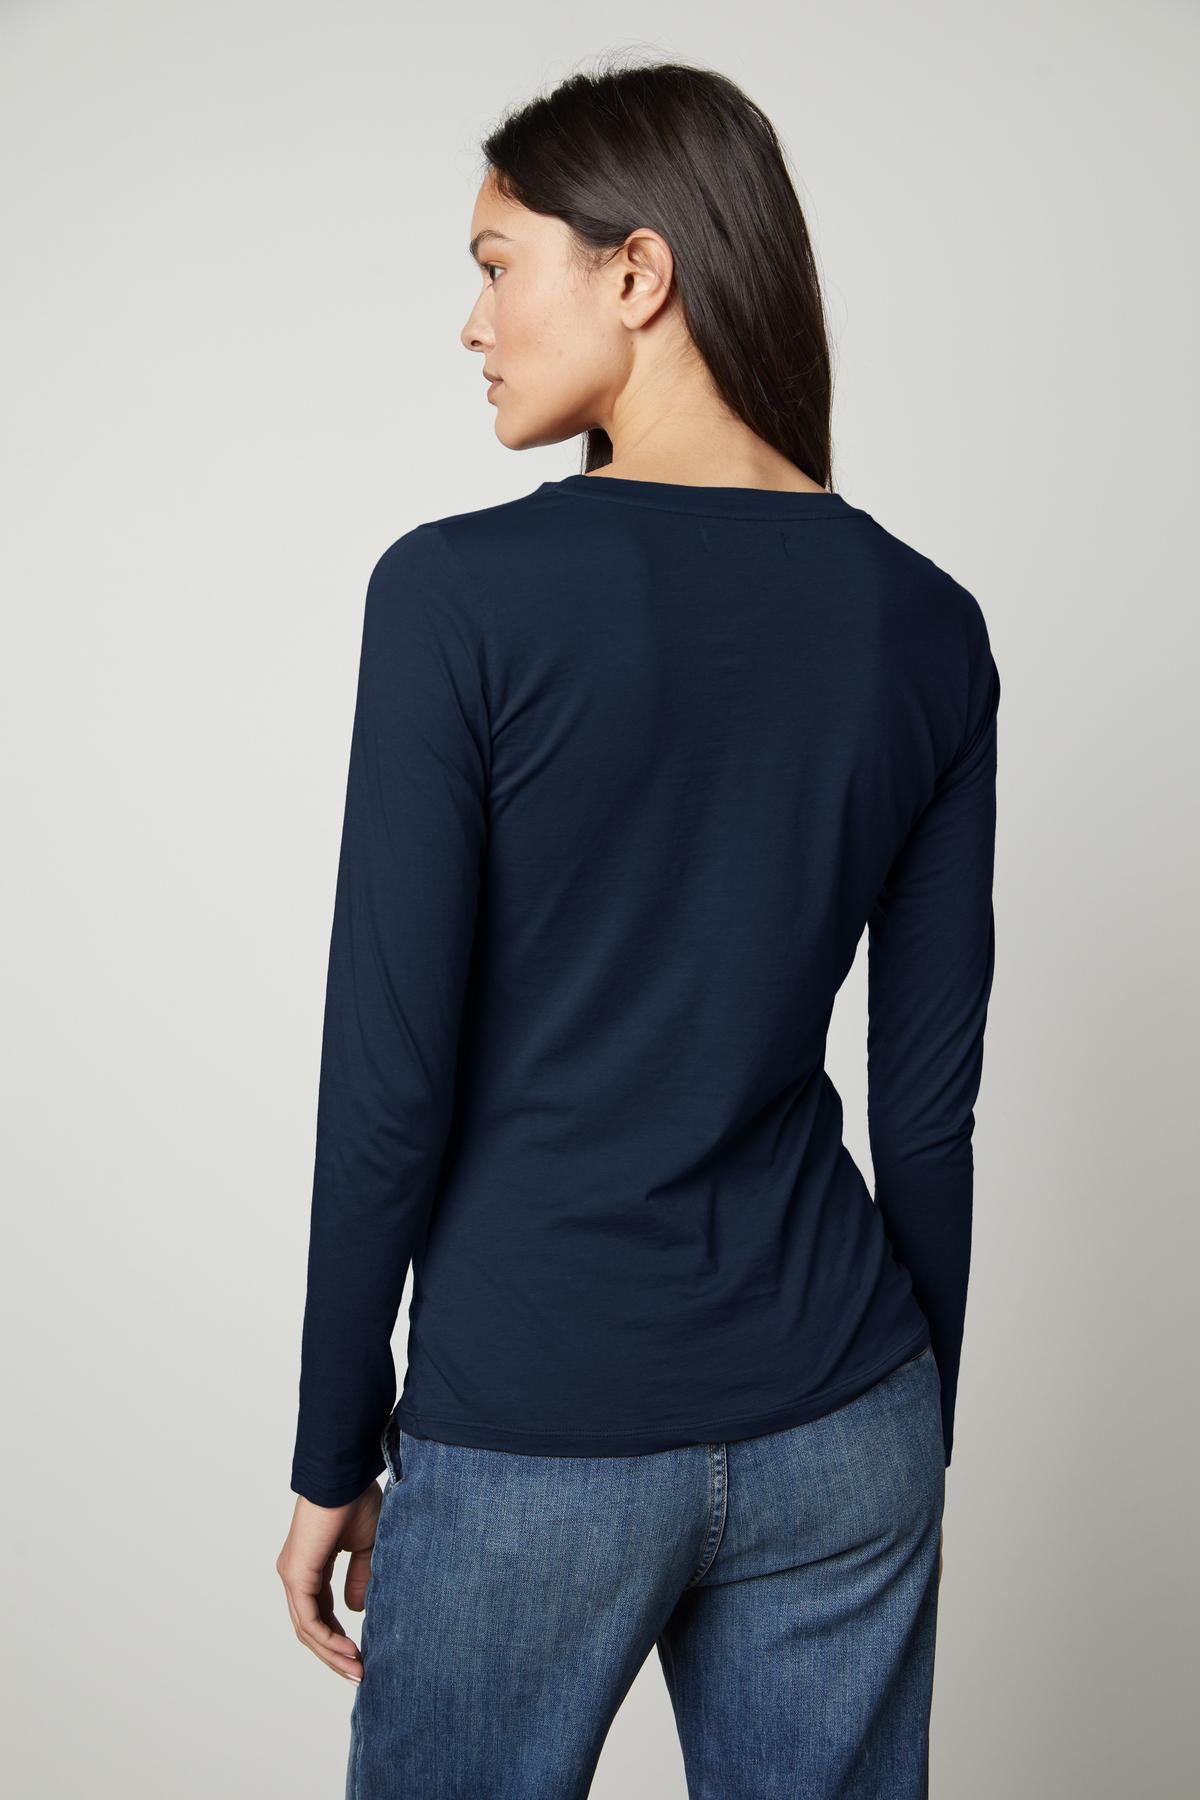 The back view of a woman wearing jeans and a Velvet by Graham & Spencer ZOFINA GAUZY WHISPER FITTED CREW NECK TEE.-35503491023041